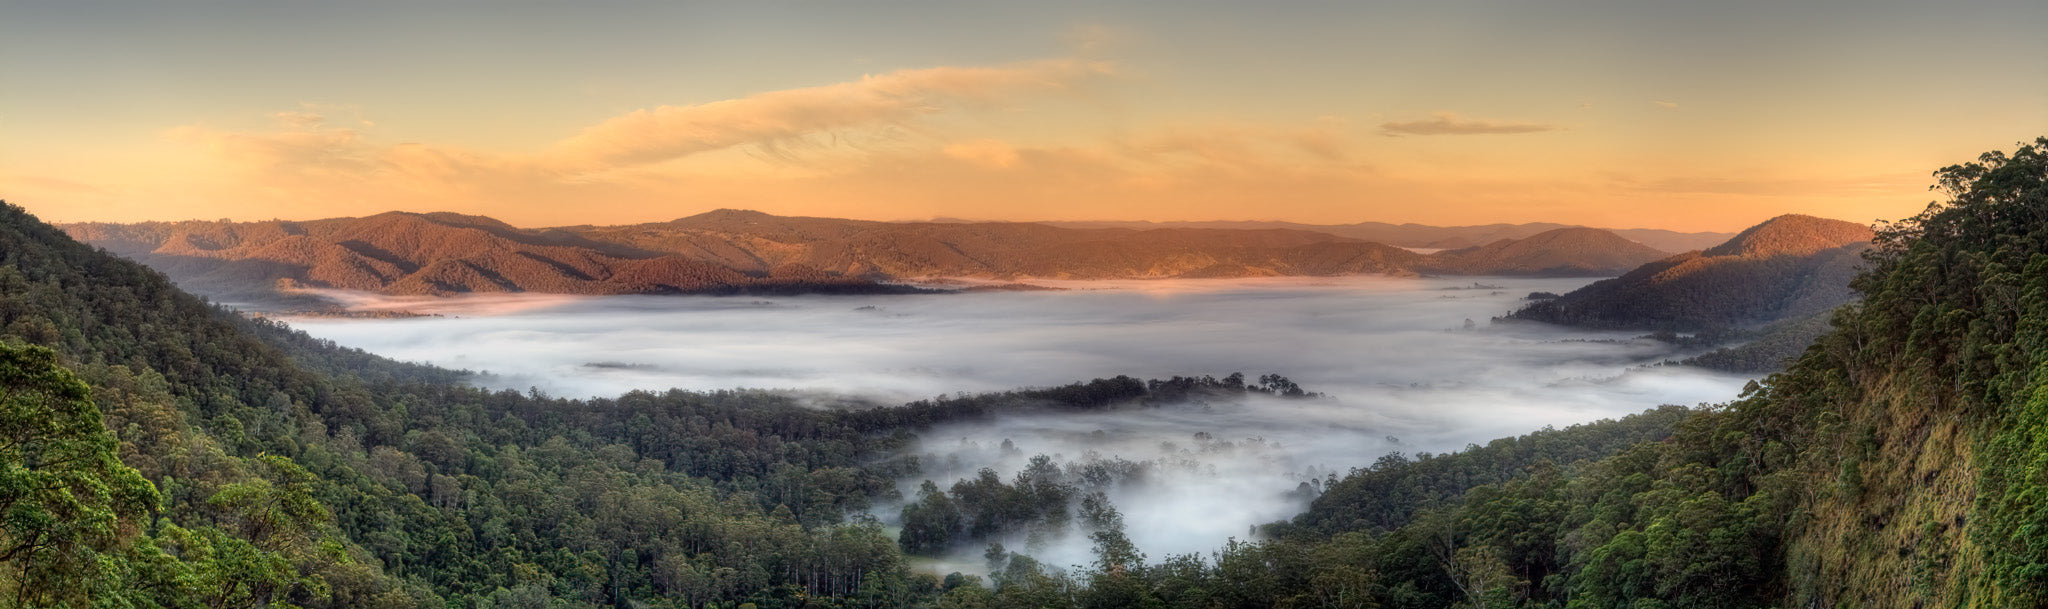 Warm early morning light touching the top of a misty inversion layer in the Obi Obi valley near Mapleton falls in Queensland, Australia.